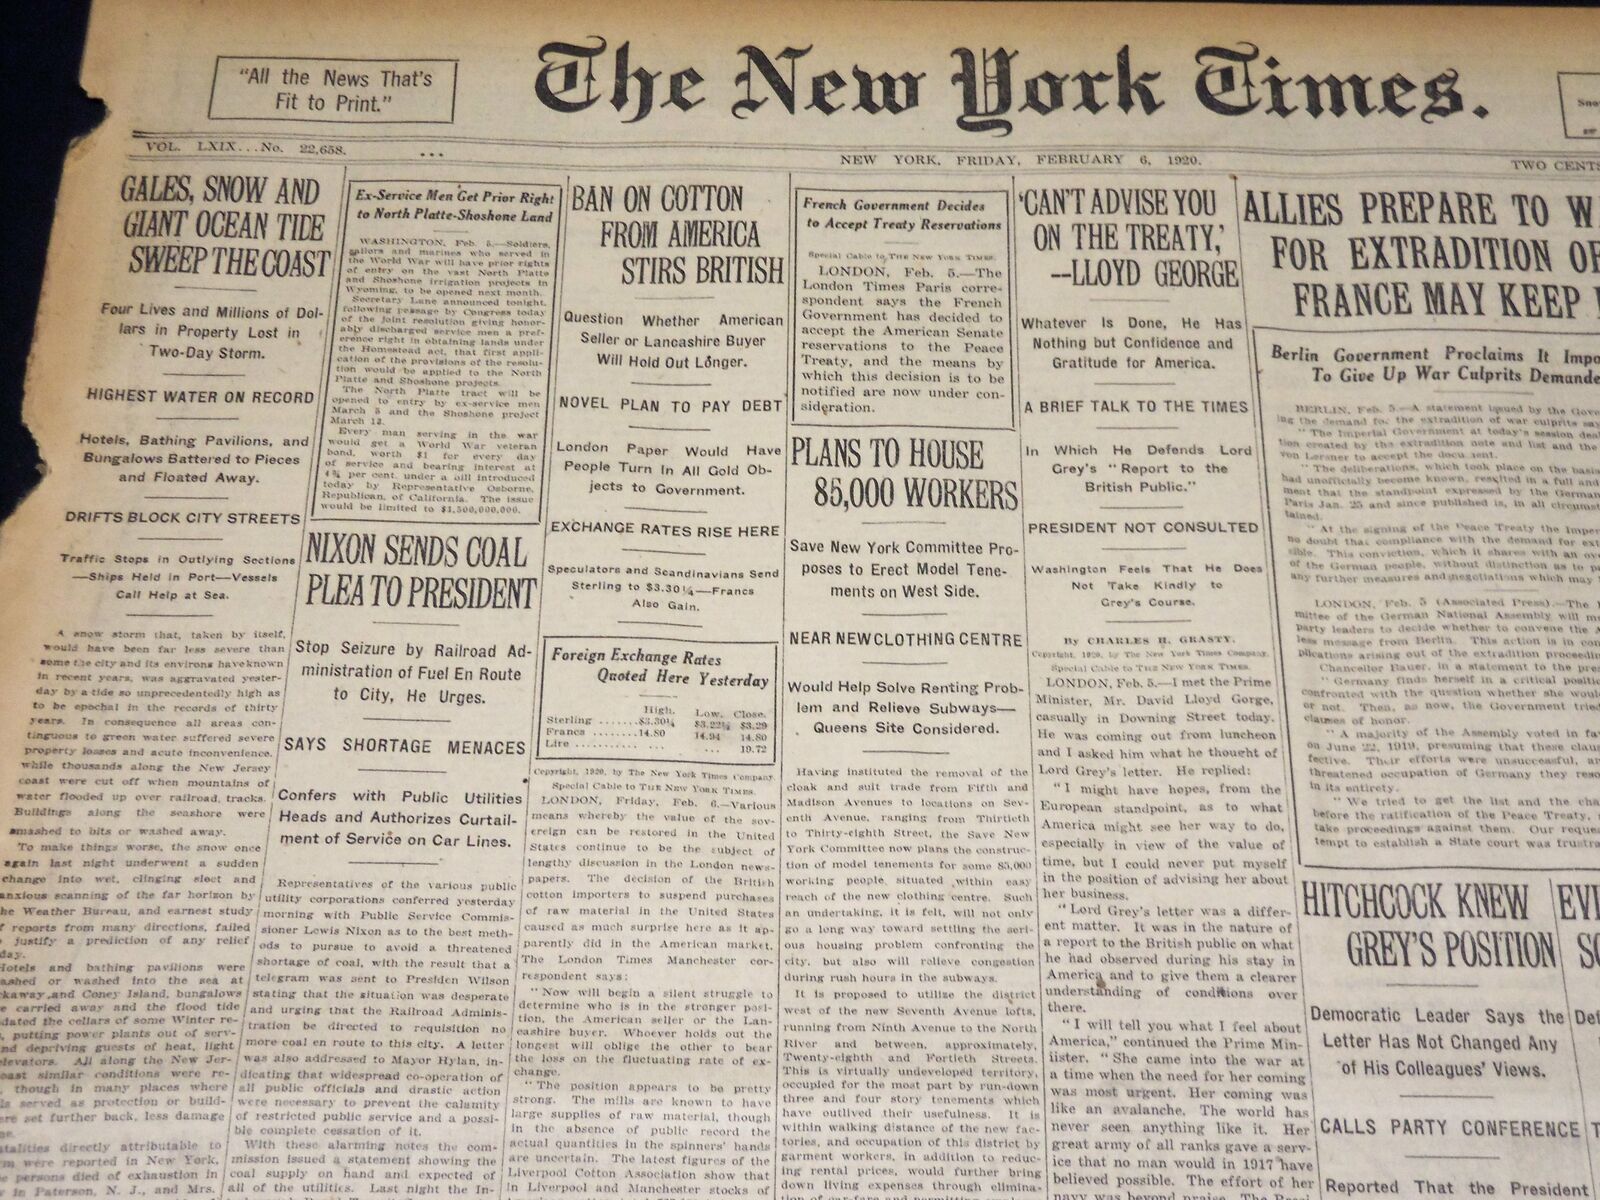 1920 FEBRUARY 6 NEW YORK TIMES - GALES & SNOW SWEPT THE COAST - NT 7862